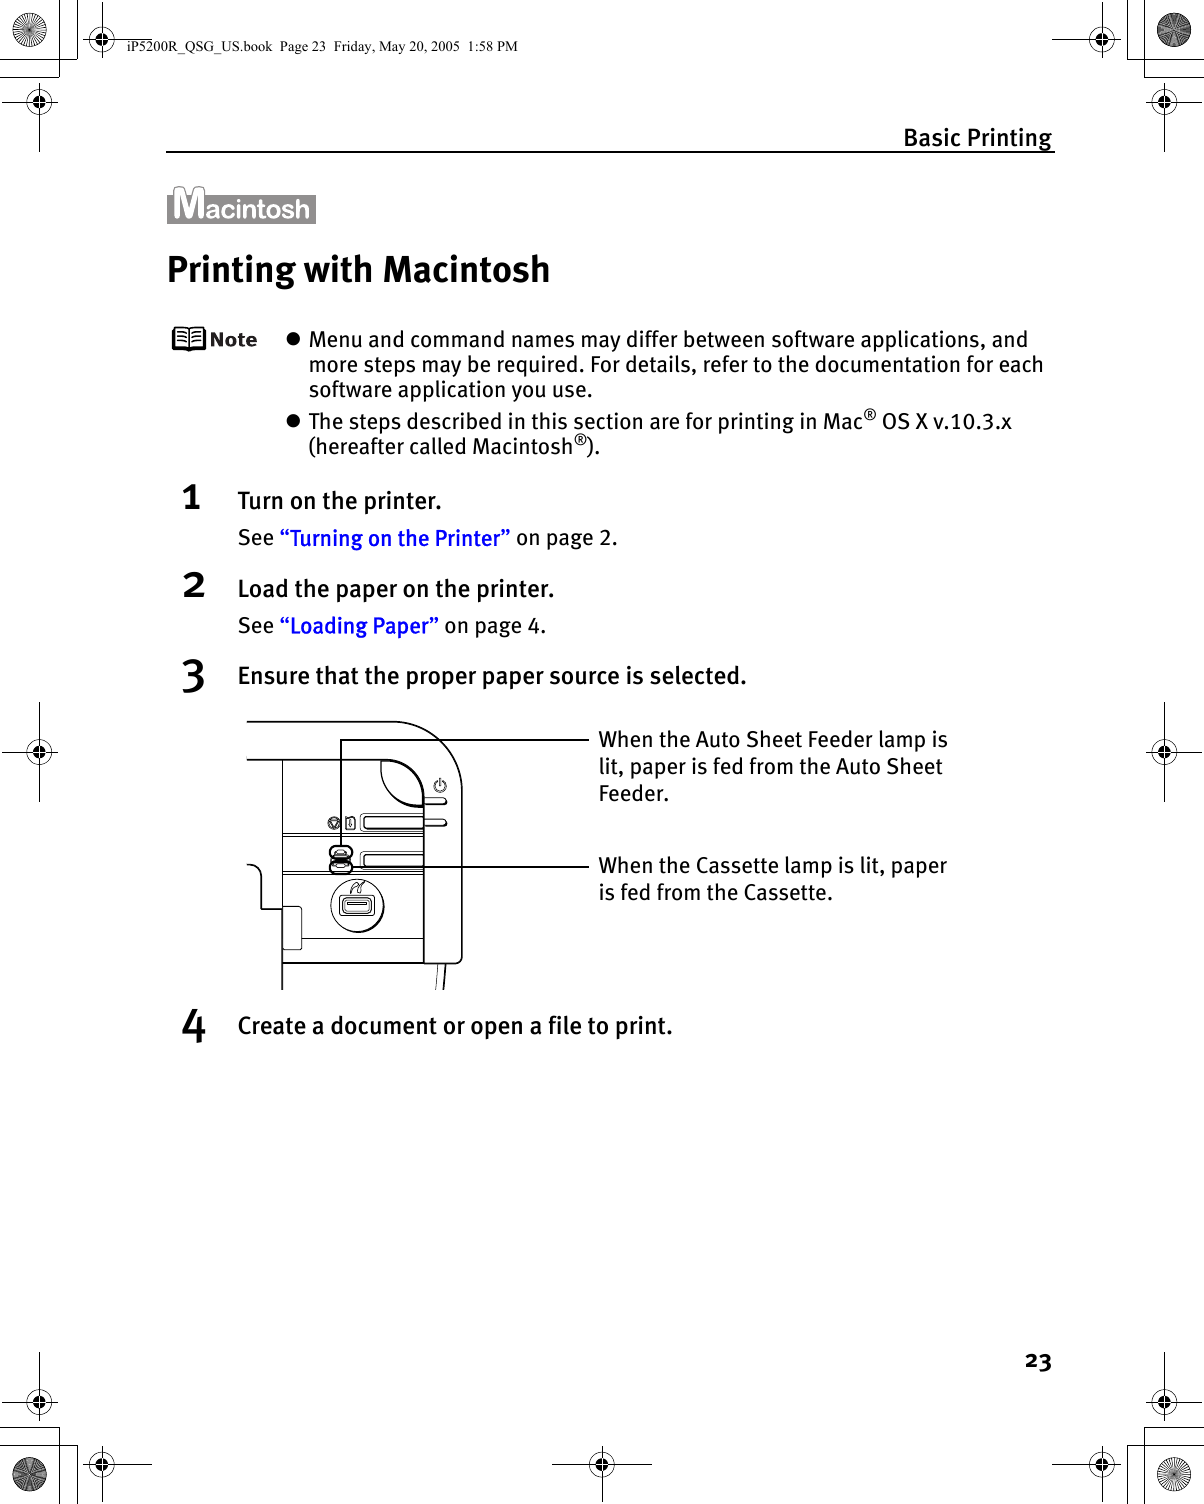 Basic Printing23Printing with MacintoshzMenu and command names may differ between software applications, and more steps may be required. For details, refer to the documentation for each software application you use.zThe steps described in this section are for printing in Mac® OS X v.10.3.x (hereafter called Macintosh®).1Turn on the printer.See “Turning on the Printer” on page 2.2Load the paper on the printer.See “Loading Paper” on page 4.3Ensure that the proper paper source is selected.4Create a document or open a file to print.When the Cassette lamp is lit, paper is fed from the Cassette.When the Auto Sheet Feeder lamp is lit, paper is fed from the Auto Sheet Feeder.iP5200R_QSG_US.book  Page 23  Friday, May 20, 2005  1:58 PM